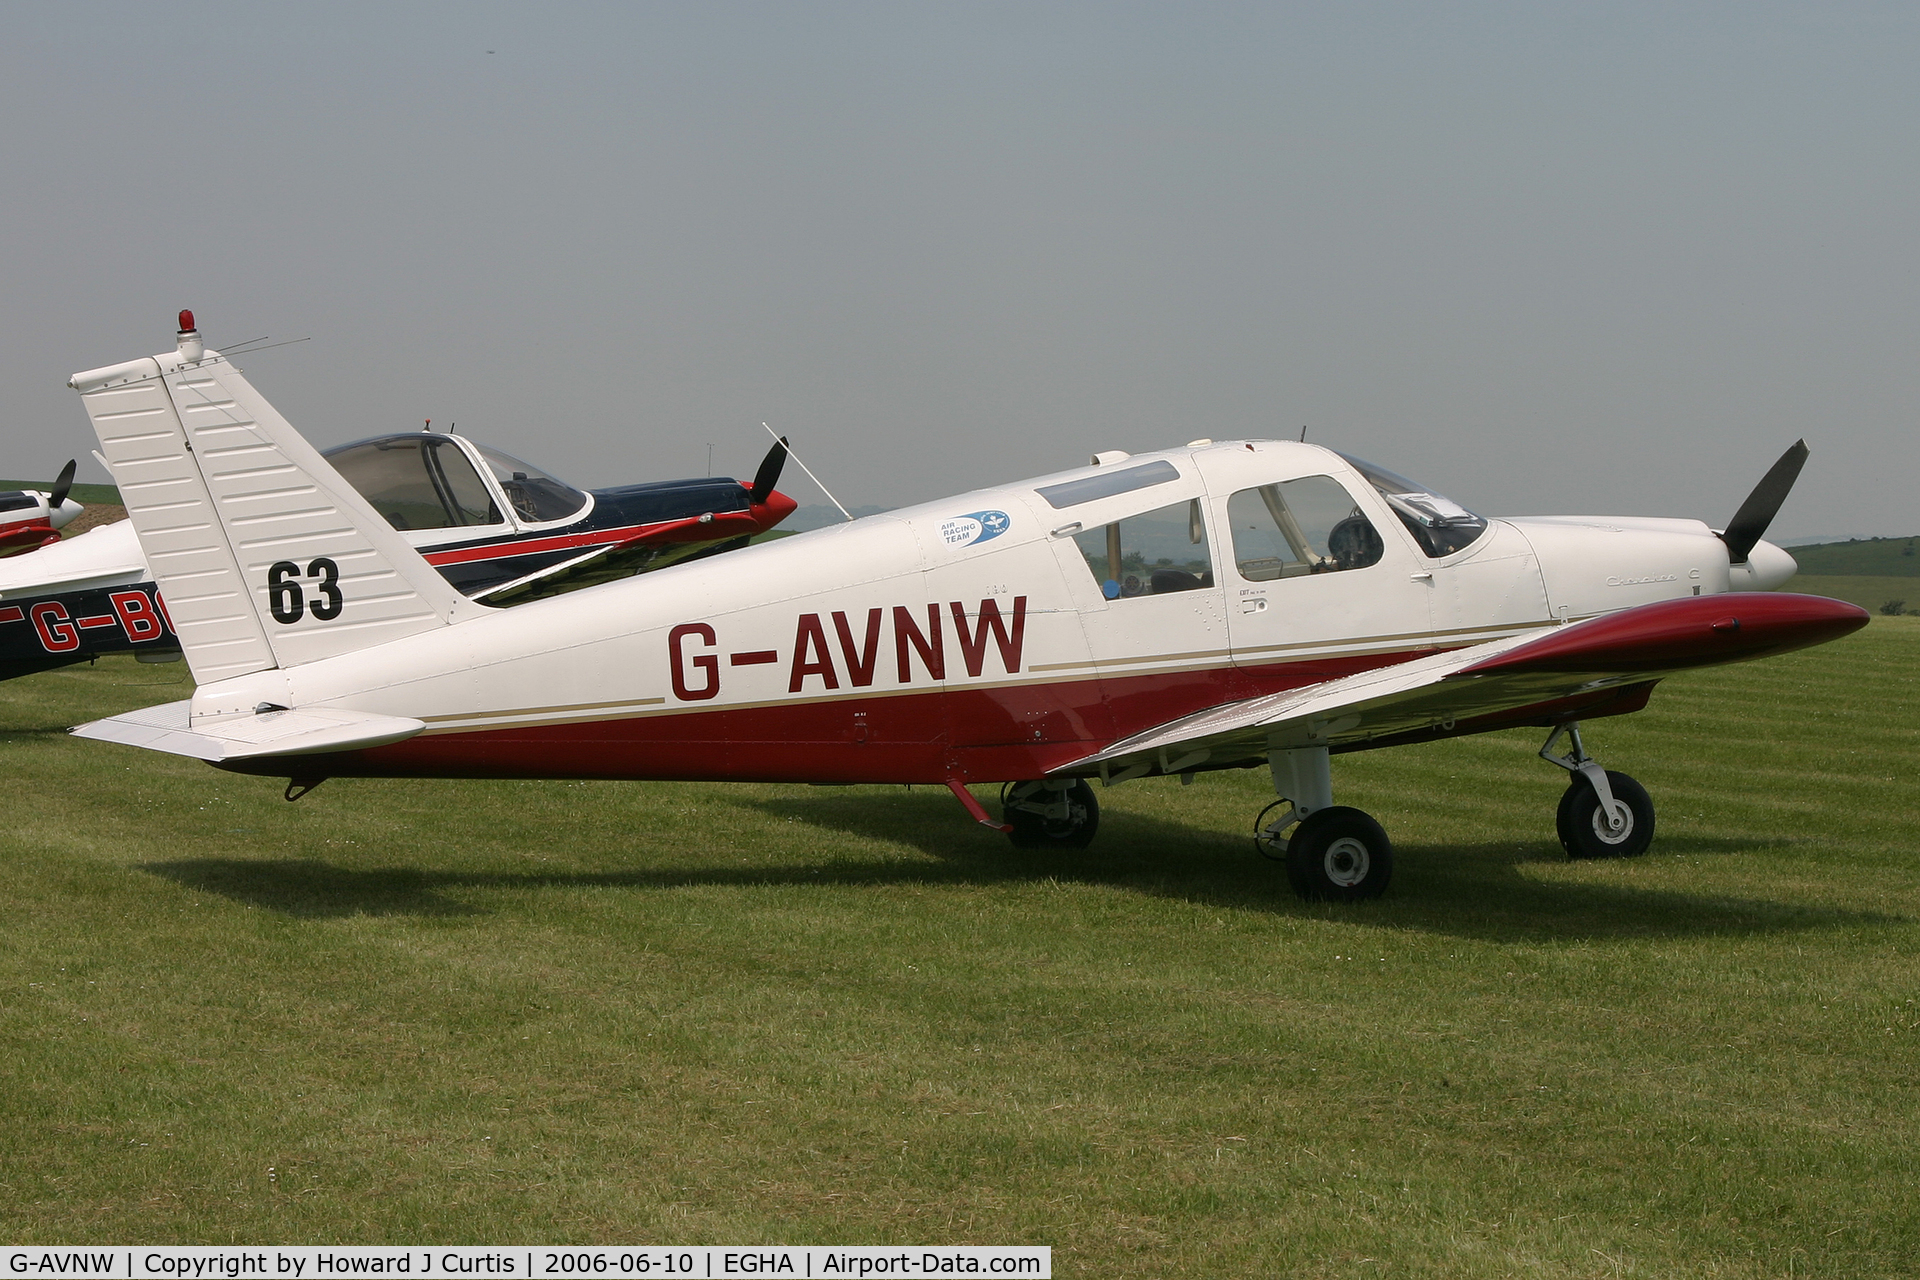 G-AVNW, 1967 Piper PA-28-180 Cherokee C/N 28-4210, Race number 63, at the Dorset Air Races.